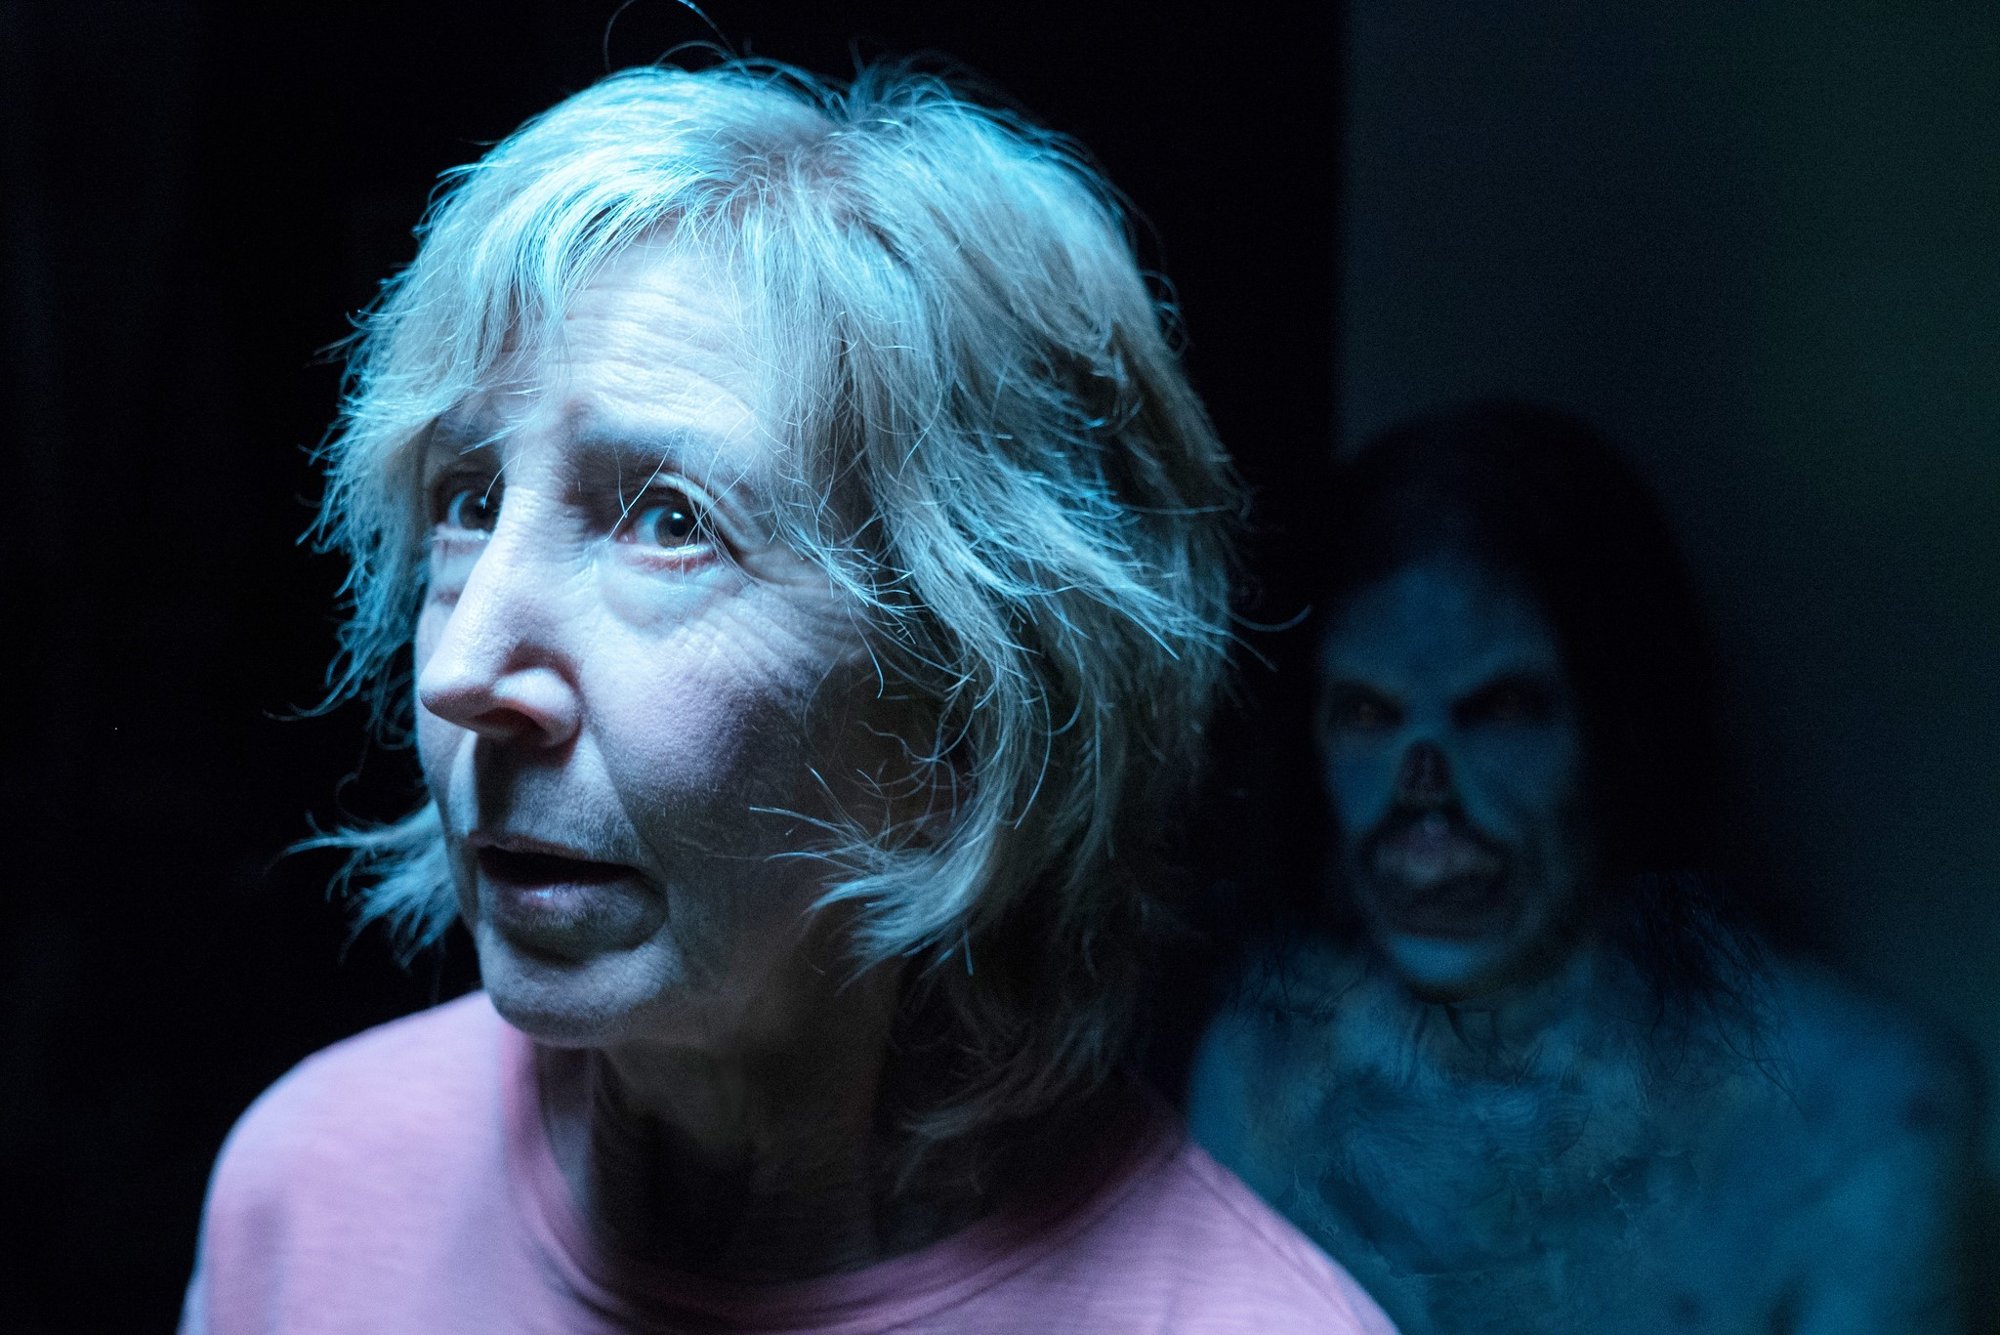 Lin Shaye stars as Elise Rainier in Universal Pictures' Insidious: The Last Key (2018)